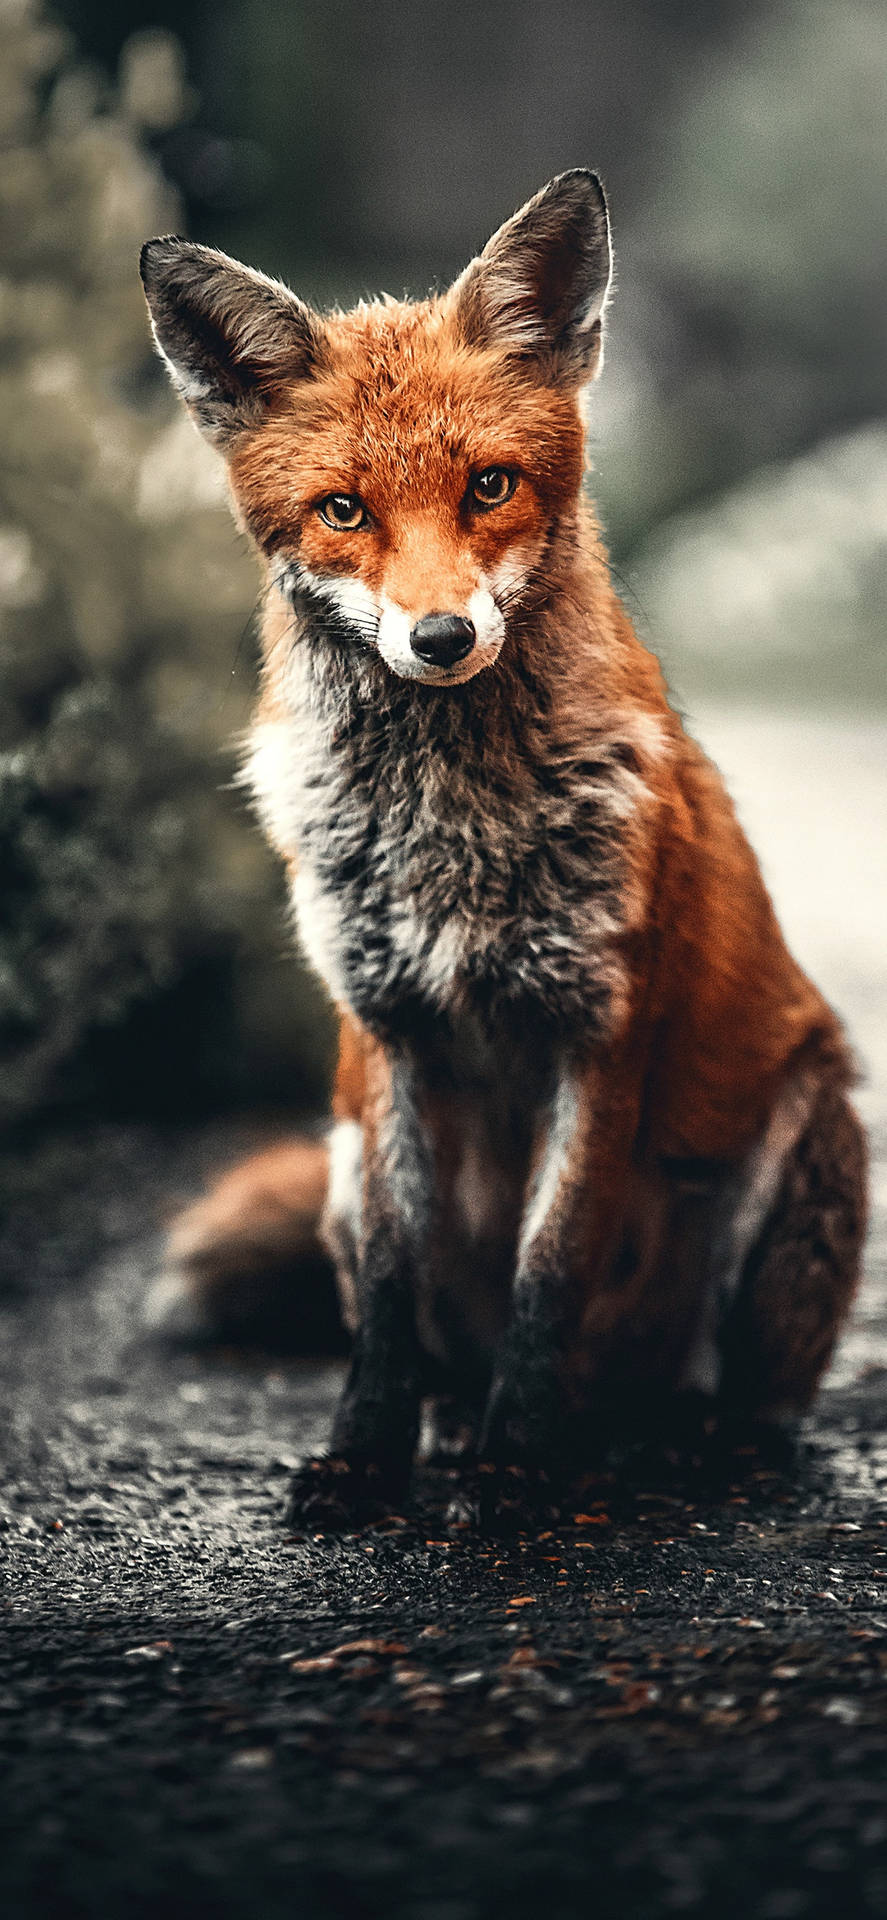 "majestic Red Fox In The Wild Nature" Wallpaper